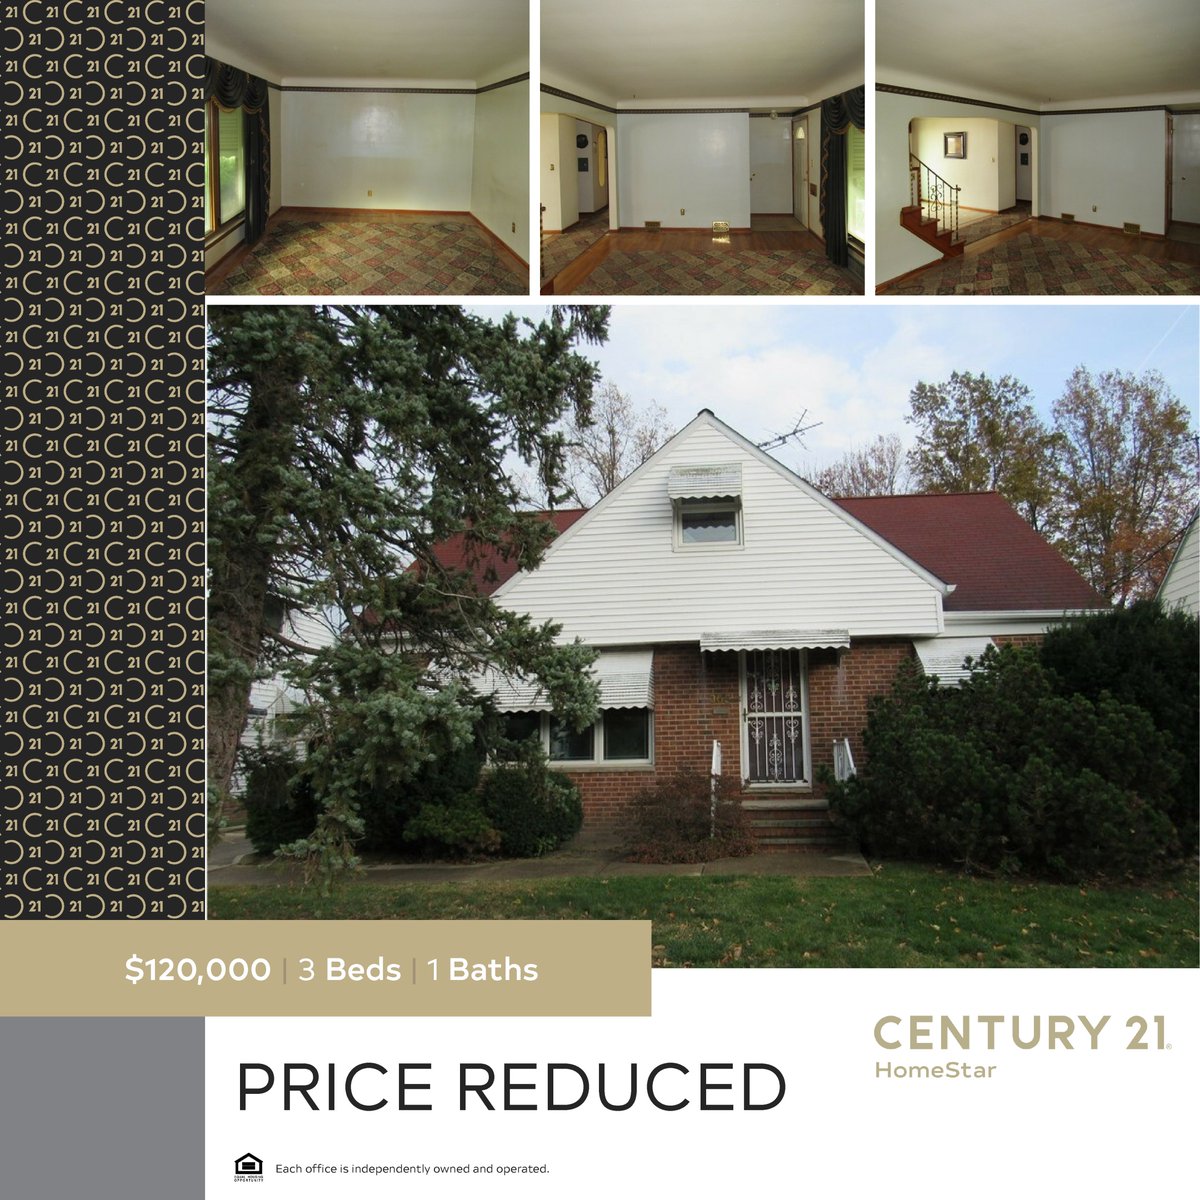 Reduced!  This home is located in Euclid.  It has hardwood floors throughout and mostly vinyl windows.  It only needs cosmetic updates.  

#reducedprice #homeforsale #listingagent #euclidohio #listingforsale #RealEstateExpert